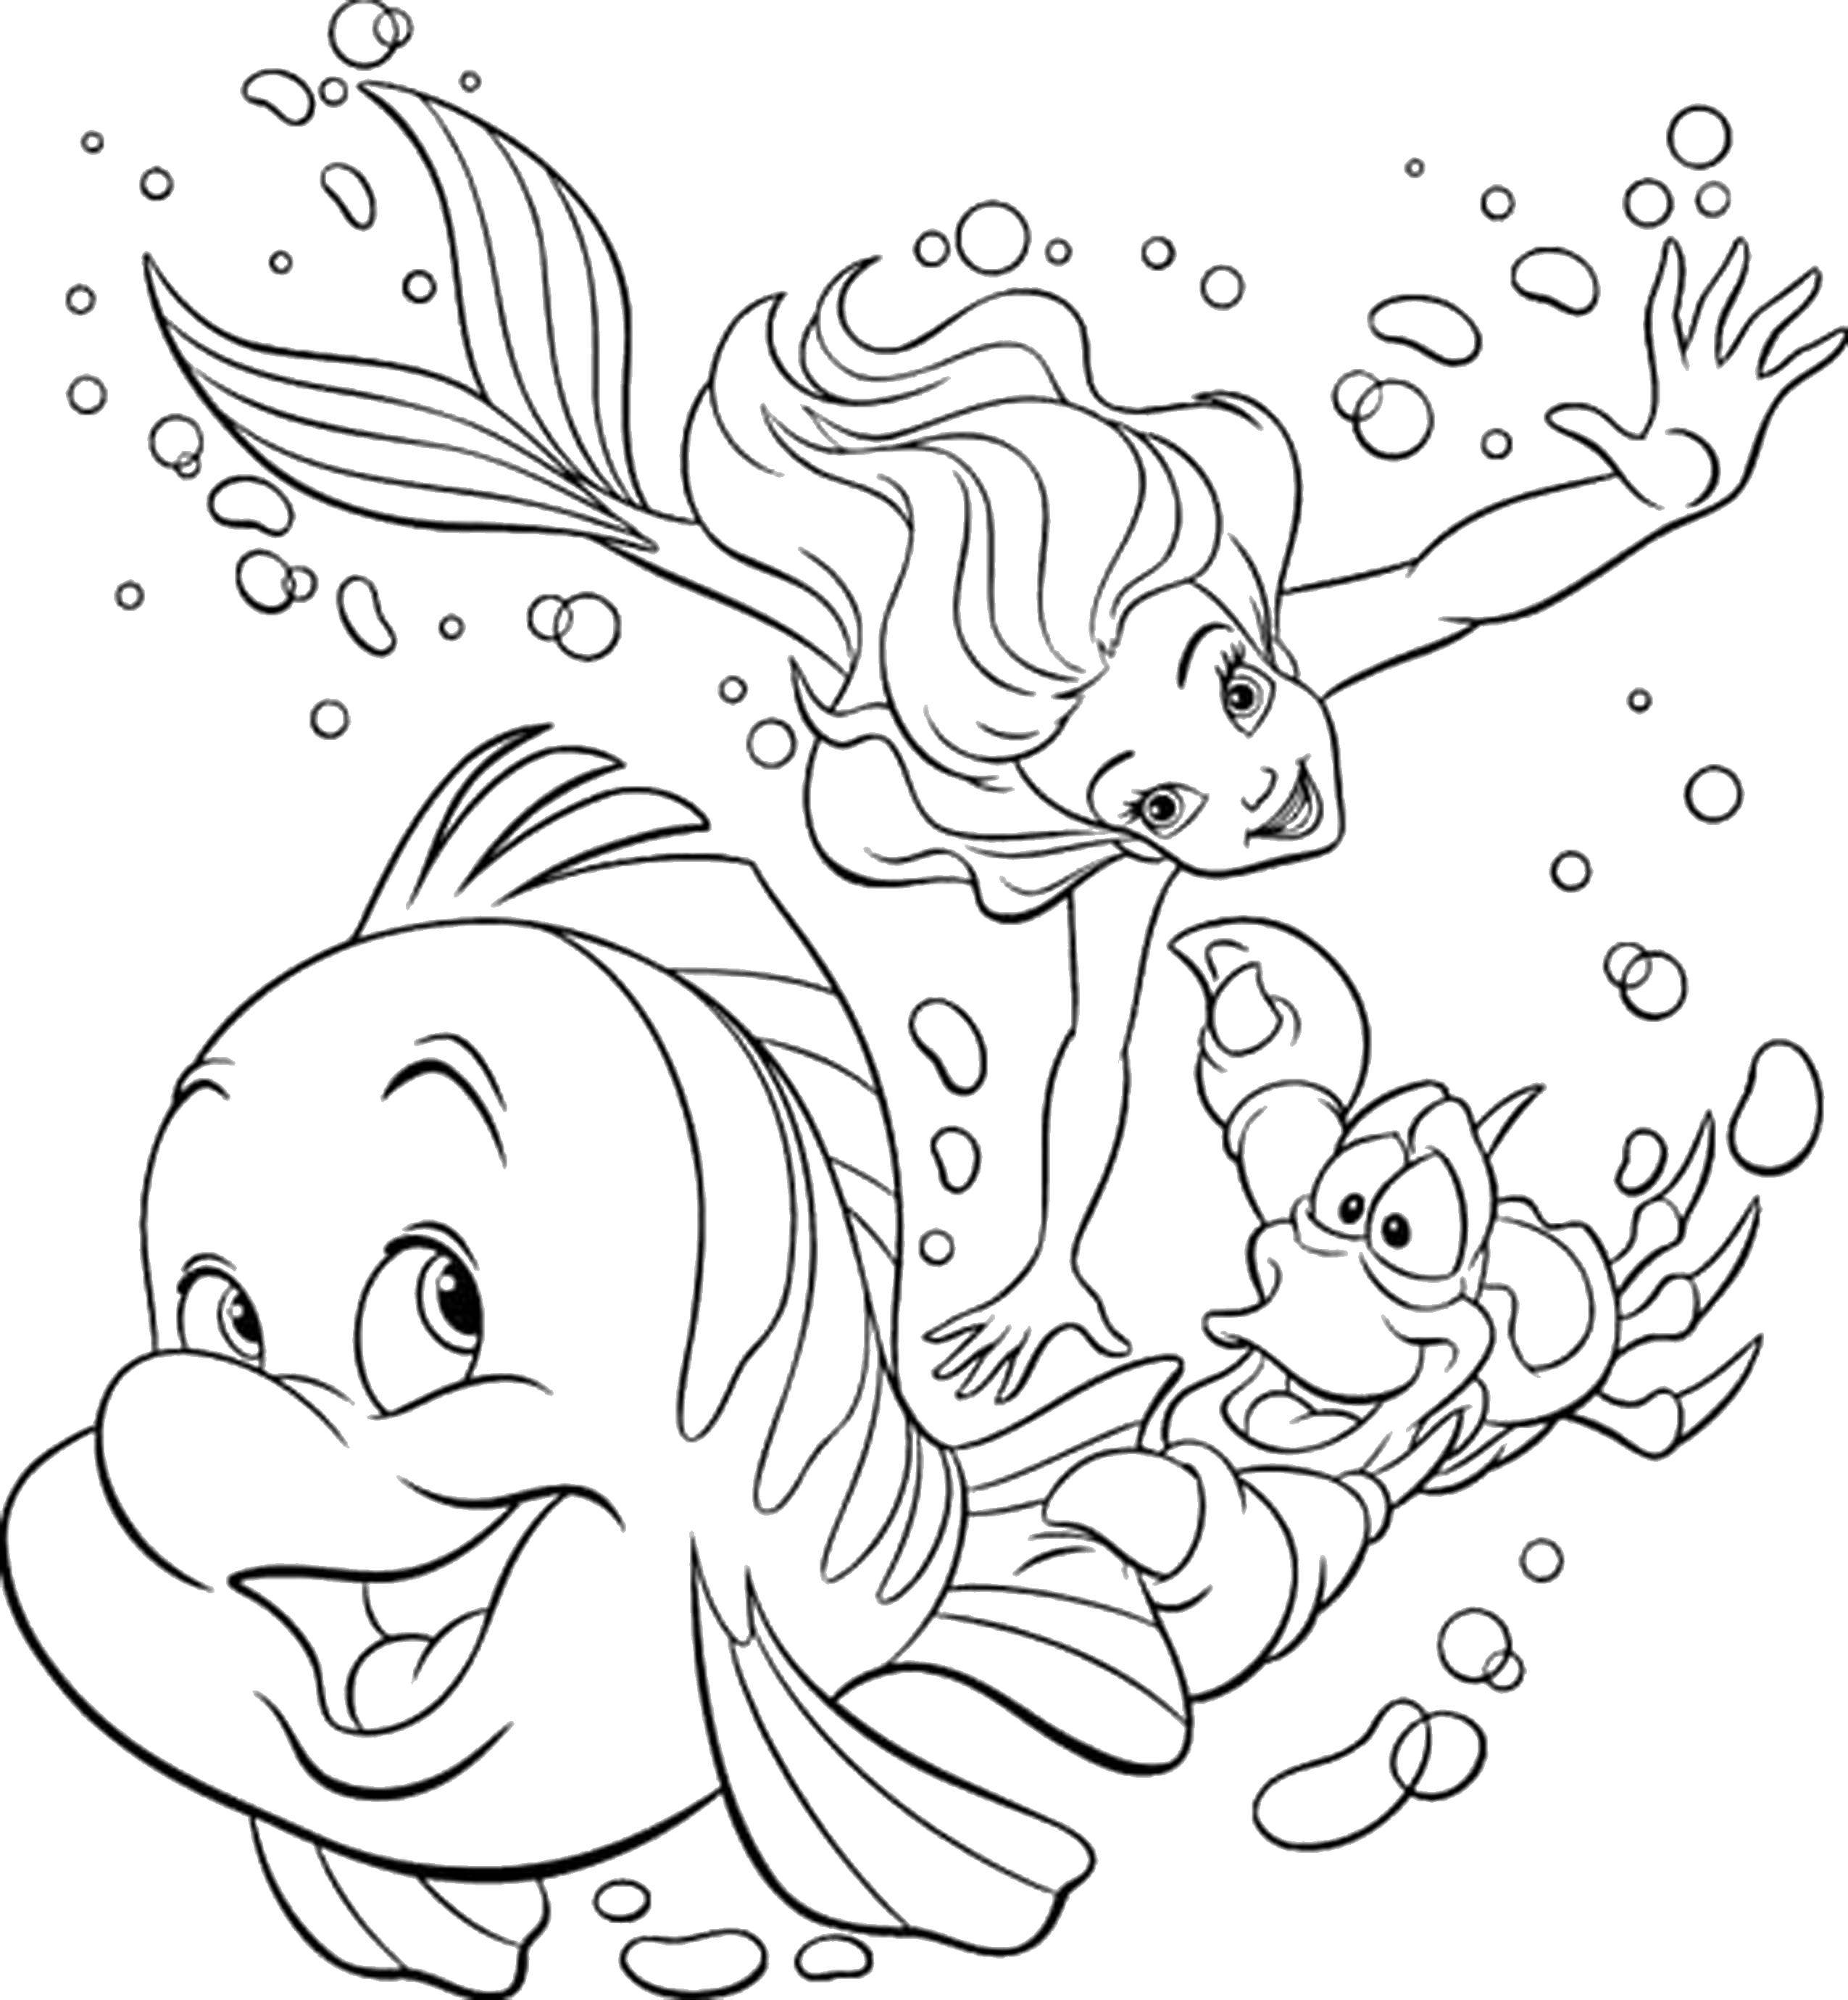 Coloring Ariel having fun with friends. Category cartoons. Tags:  Disney, the little mermaid, Ariel.